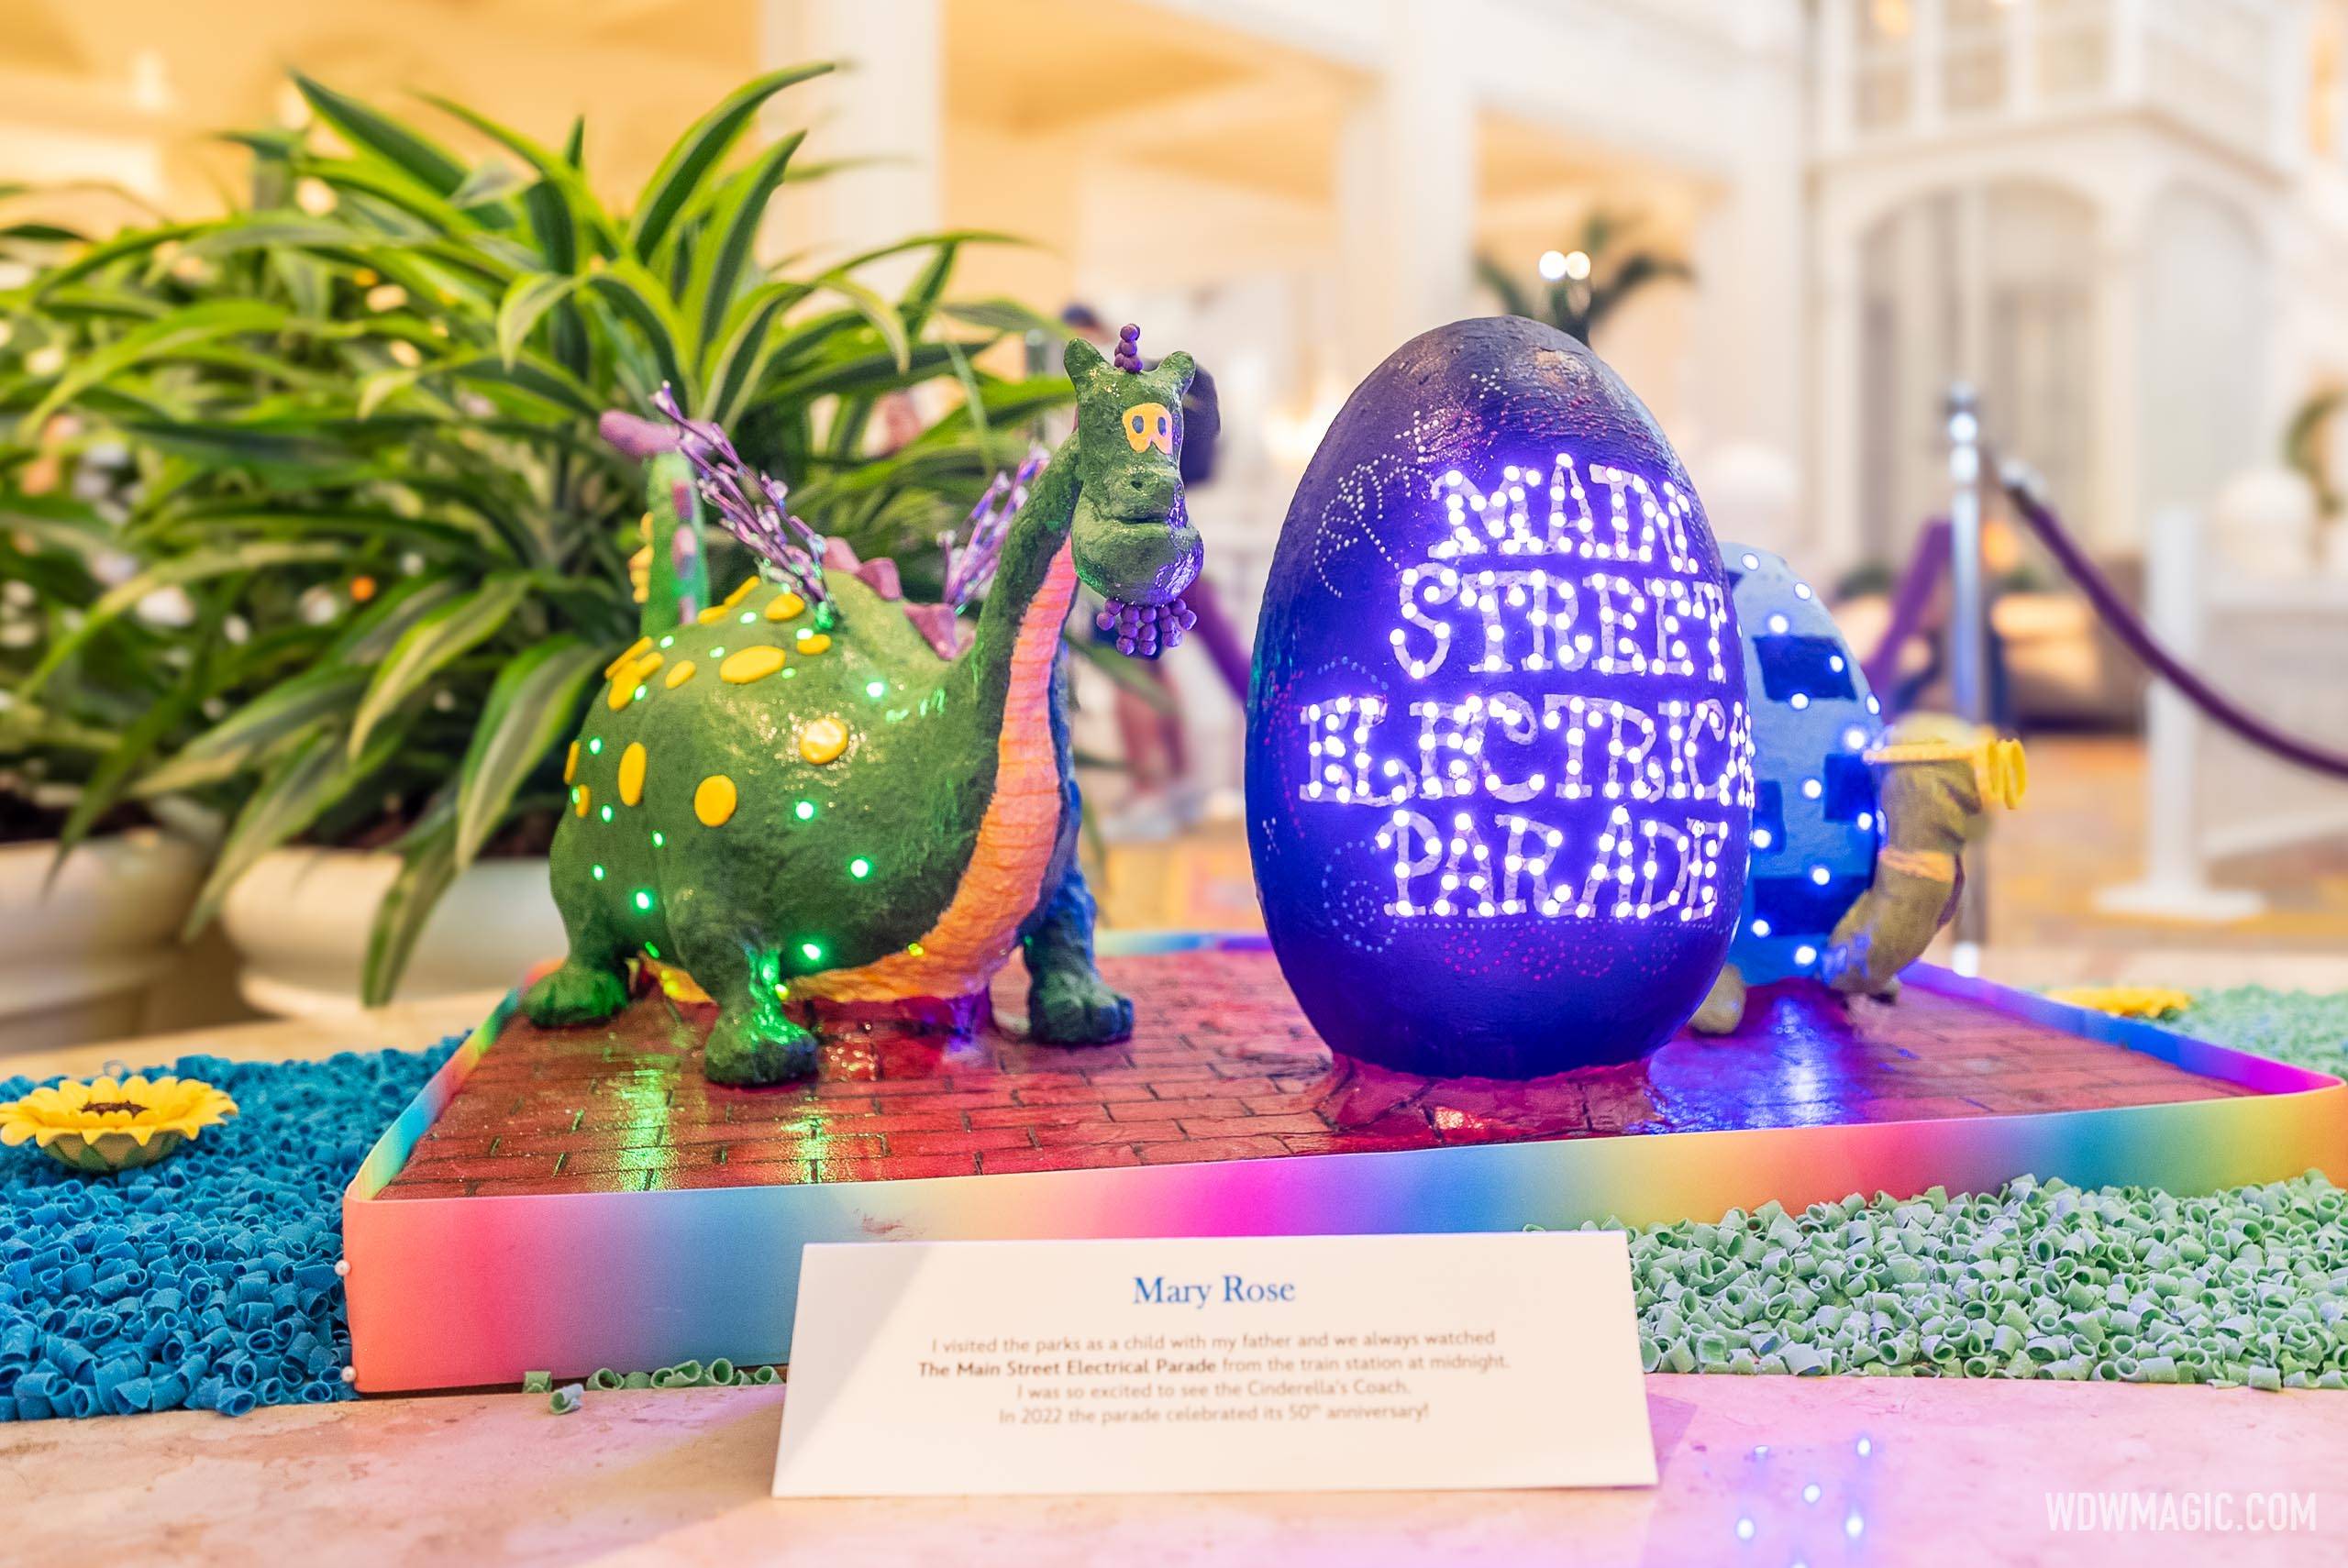 Behind-the-scenes look at creating Walt Disney World's famous Easter Egg displays